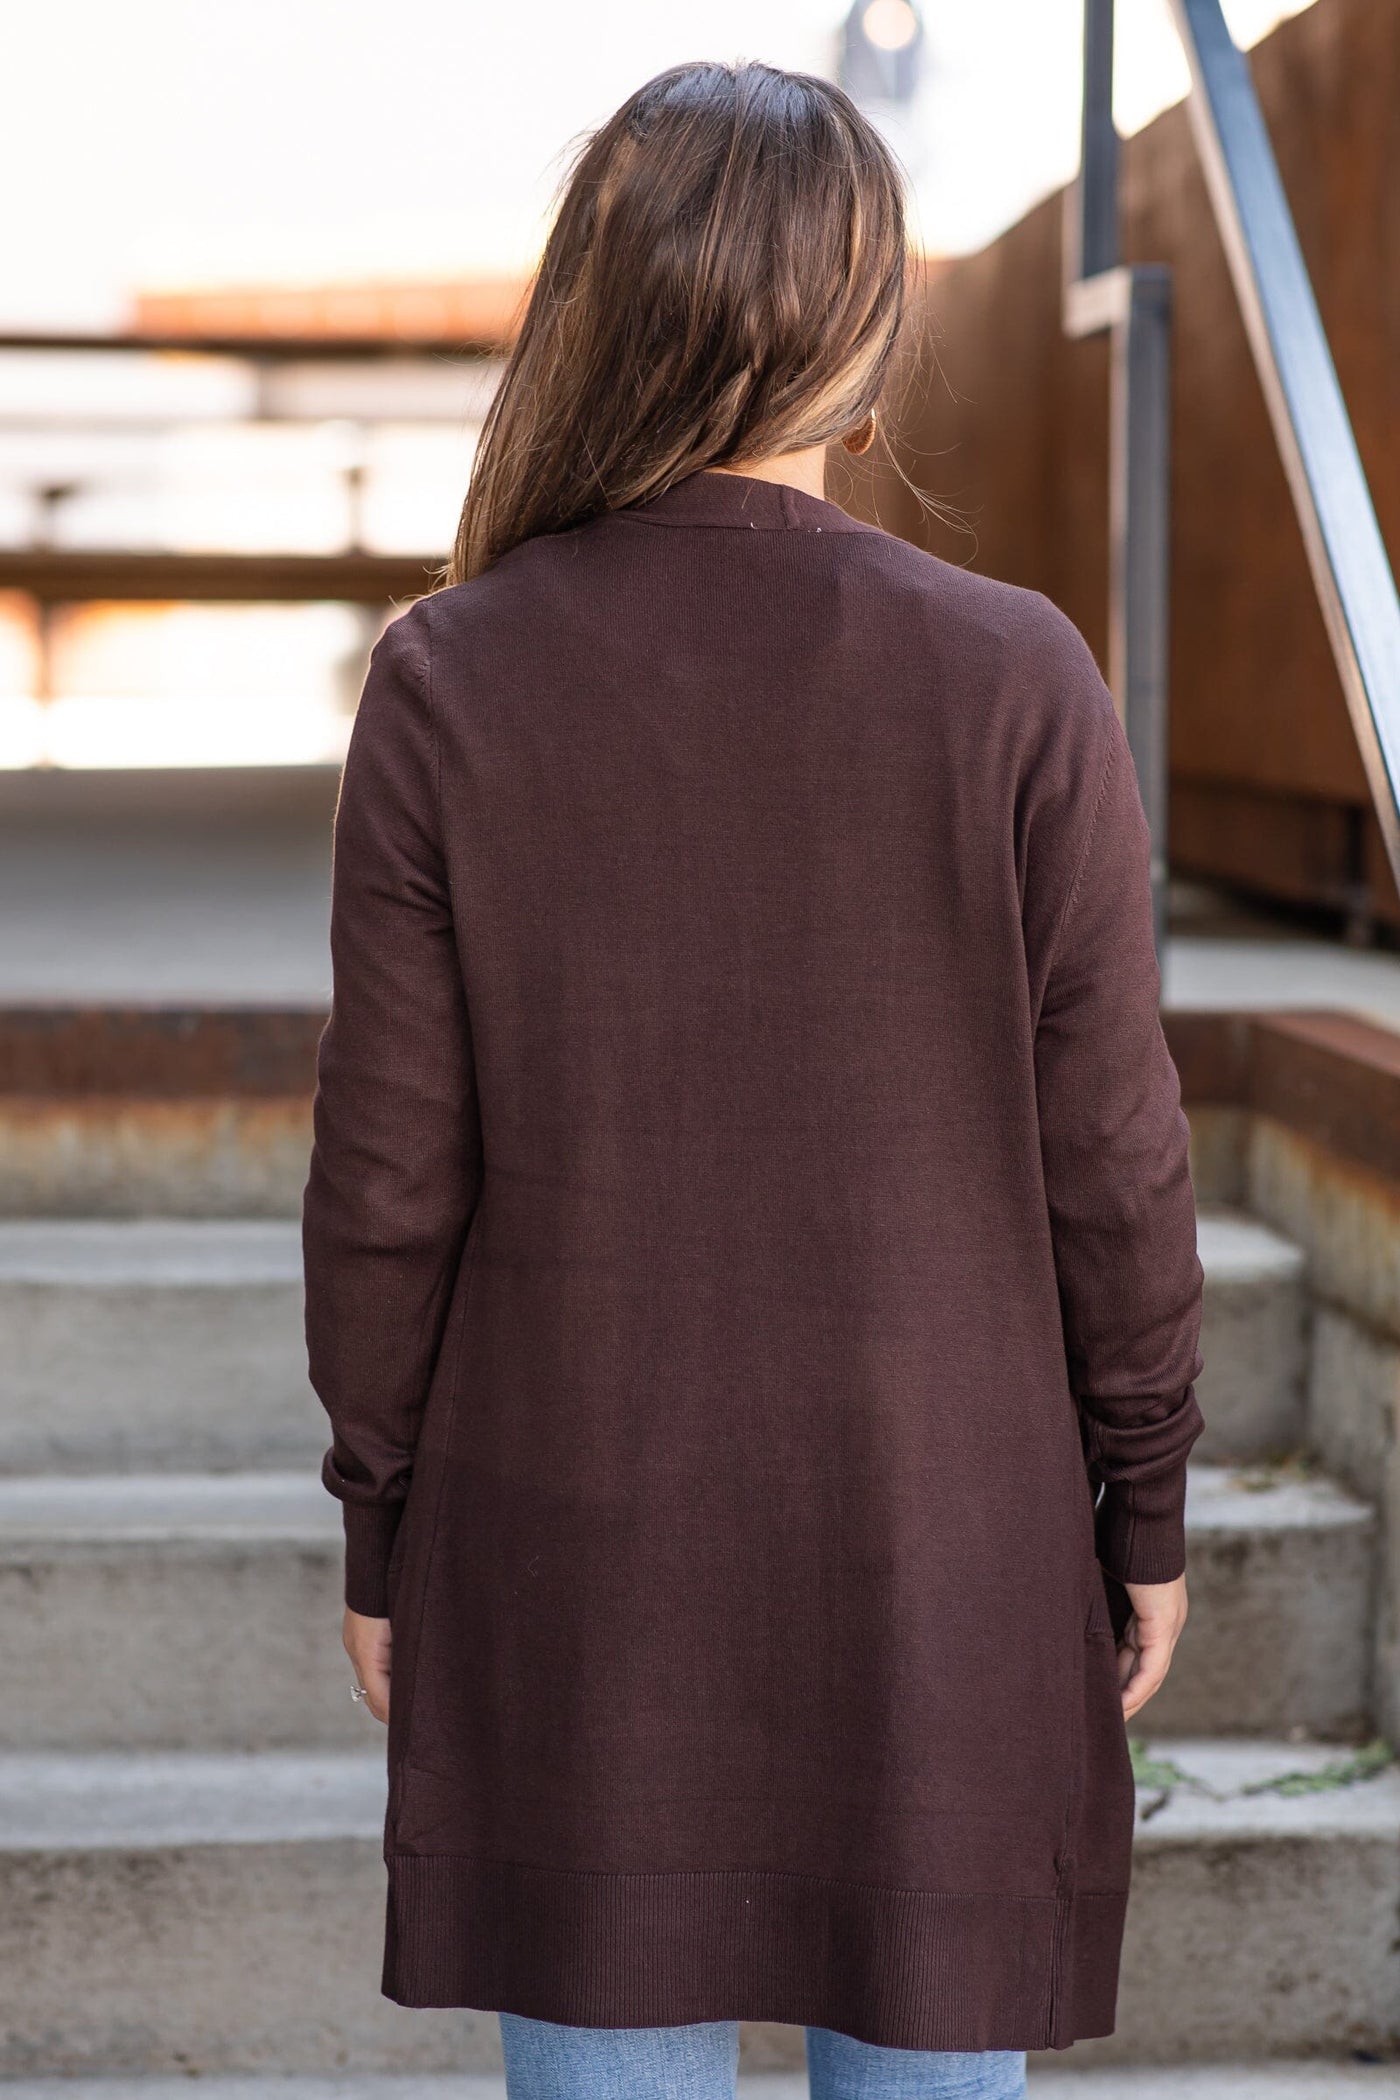 Brown Lightweight Mid Length Cardigan - Filly Flair